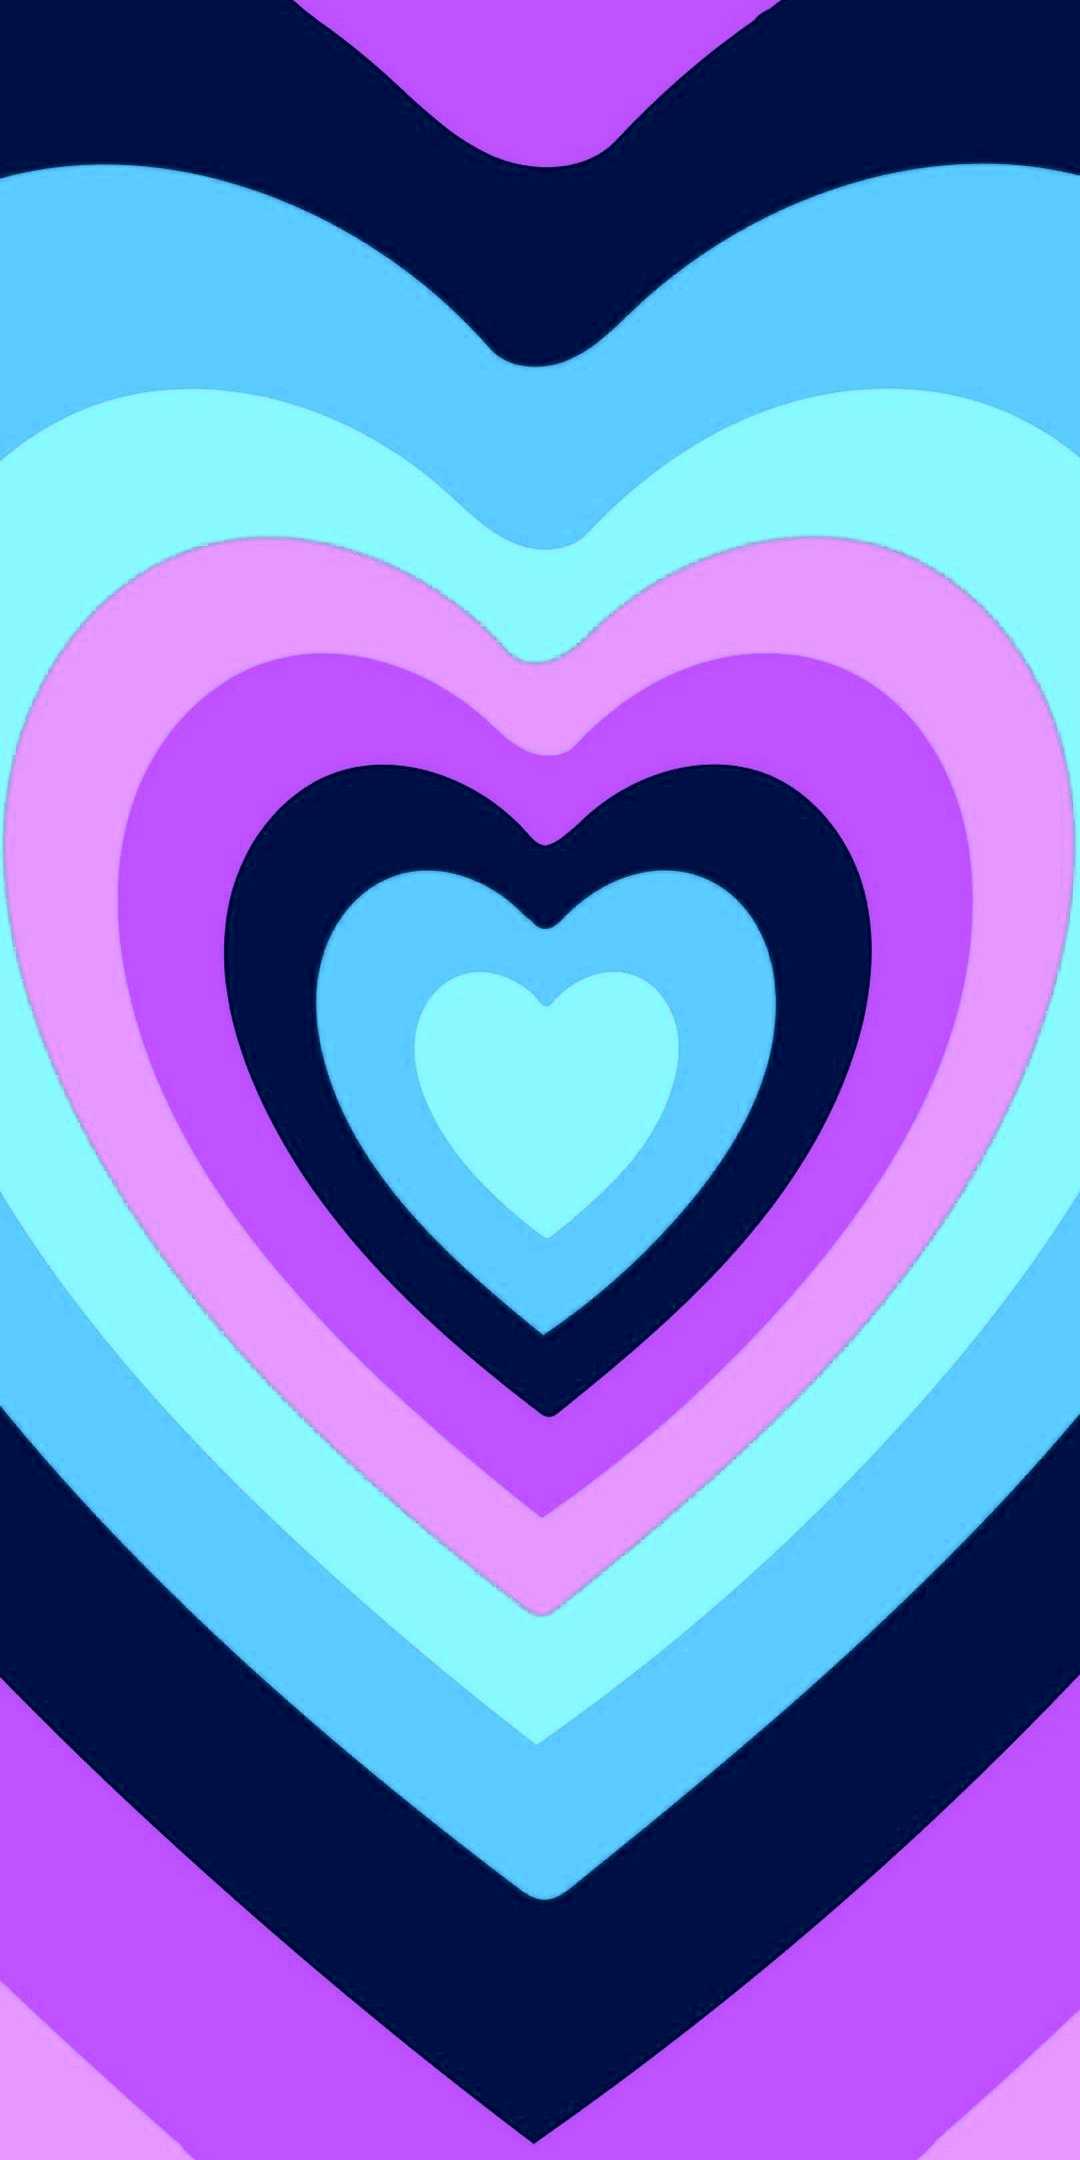 Heart Tunnel Wallpaper  Lively by ZomBieTM on DeviantArt